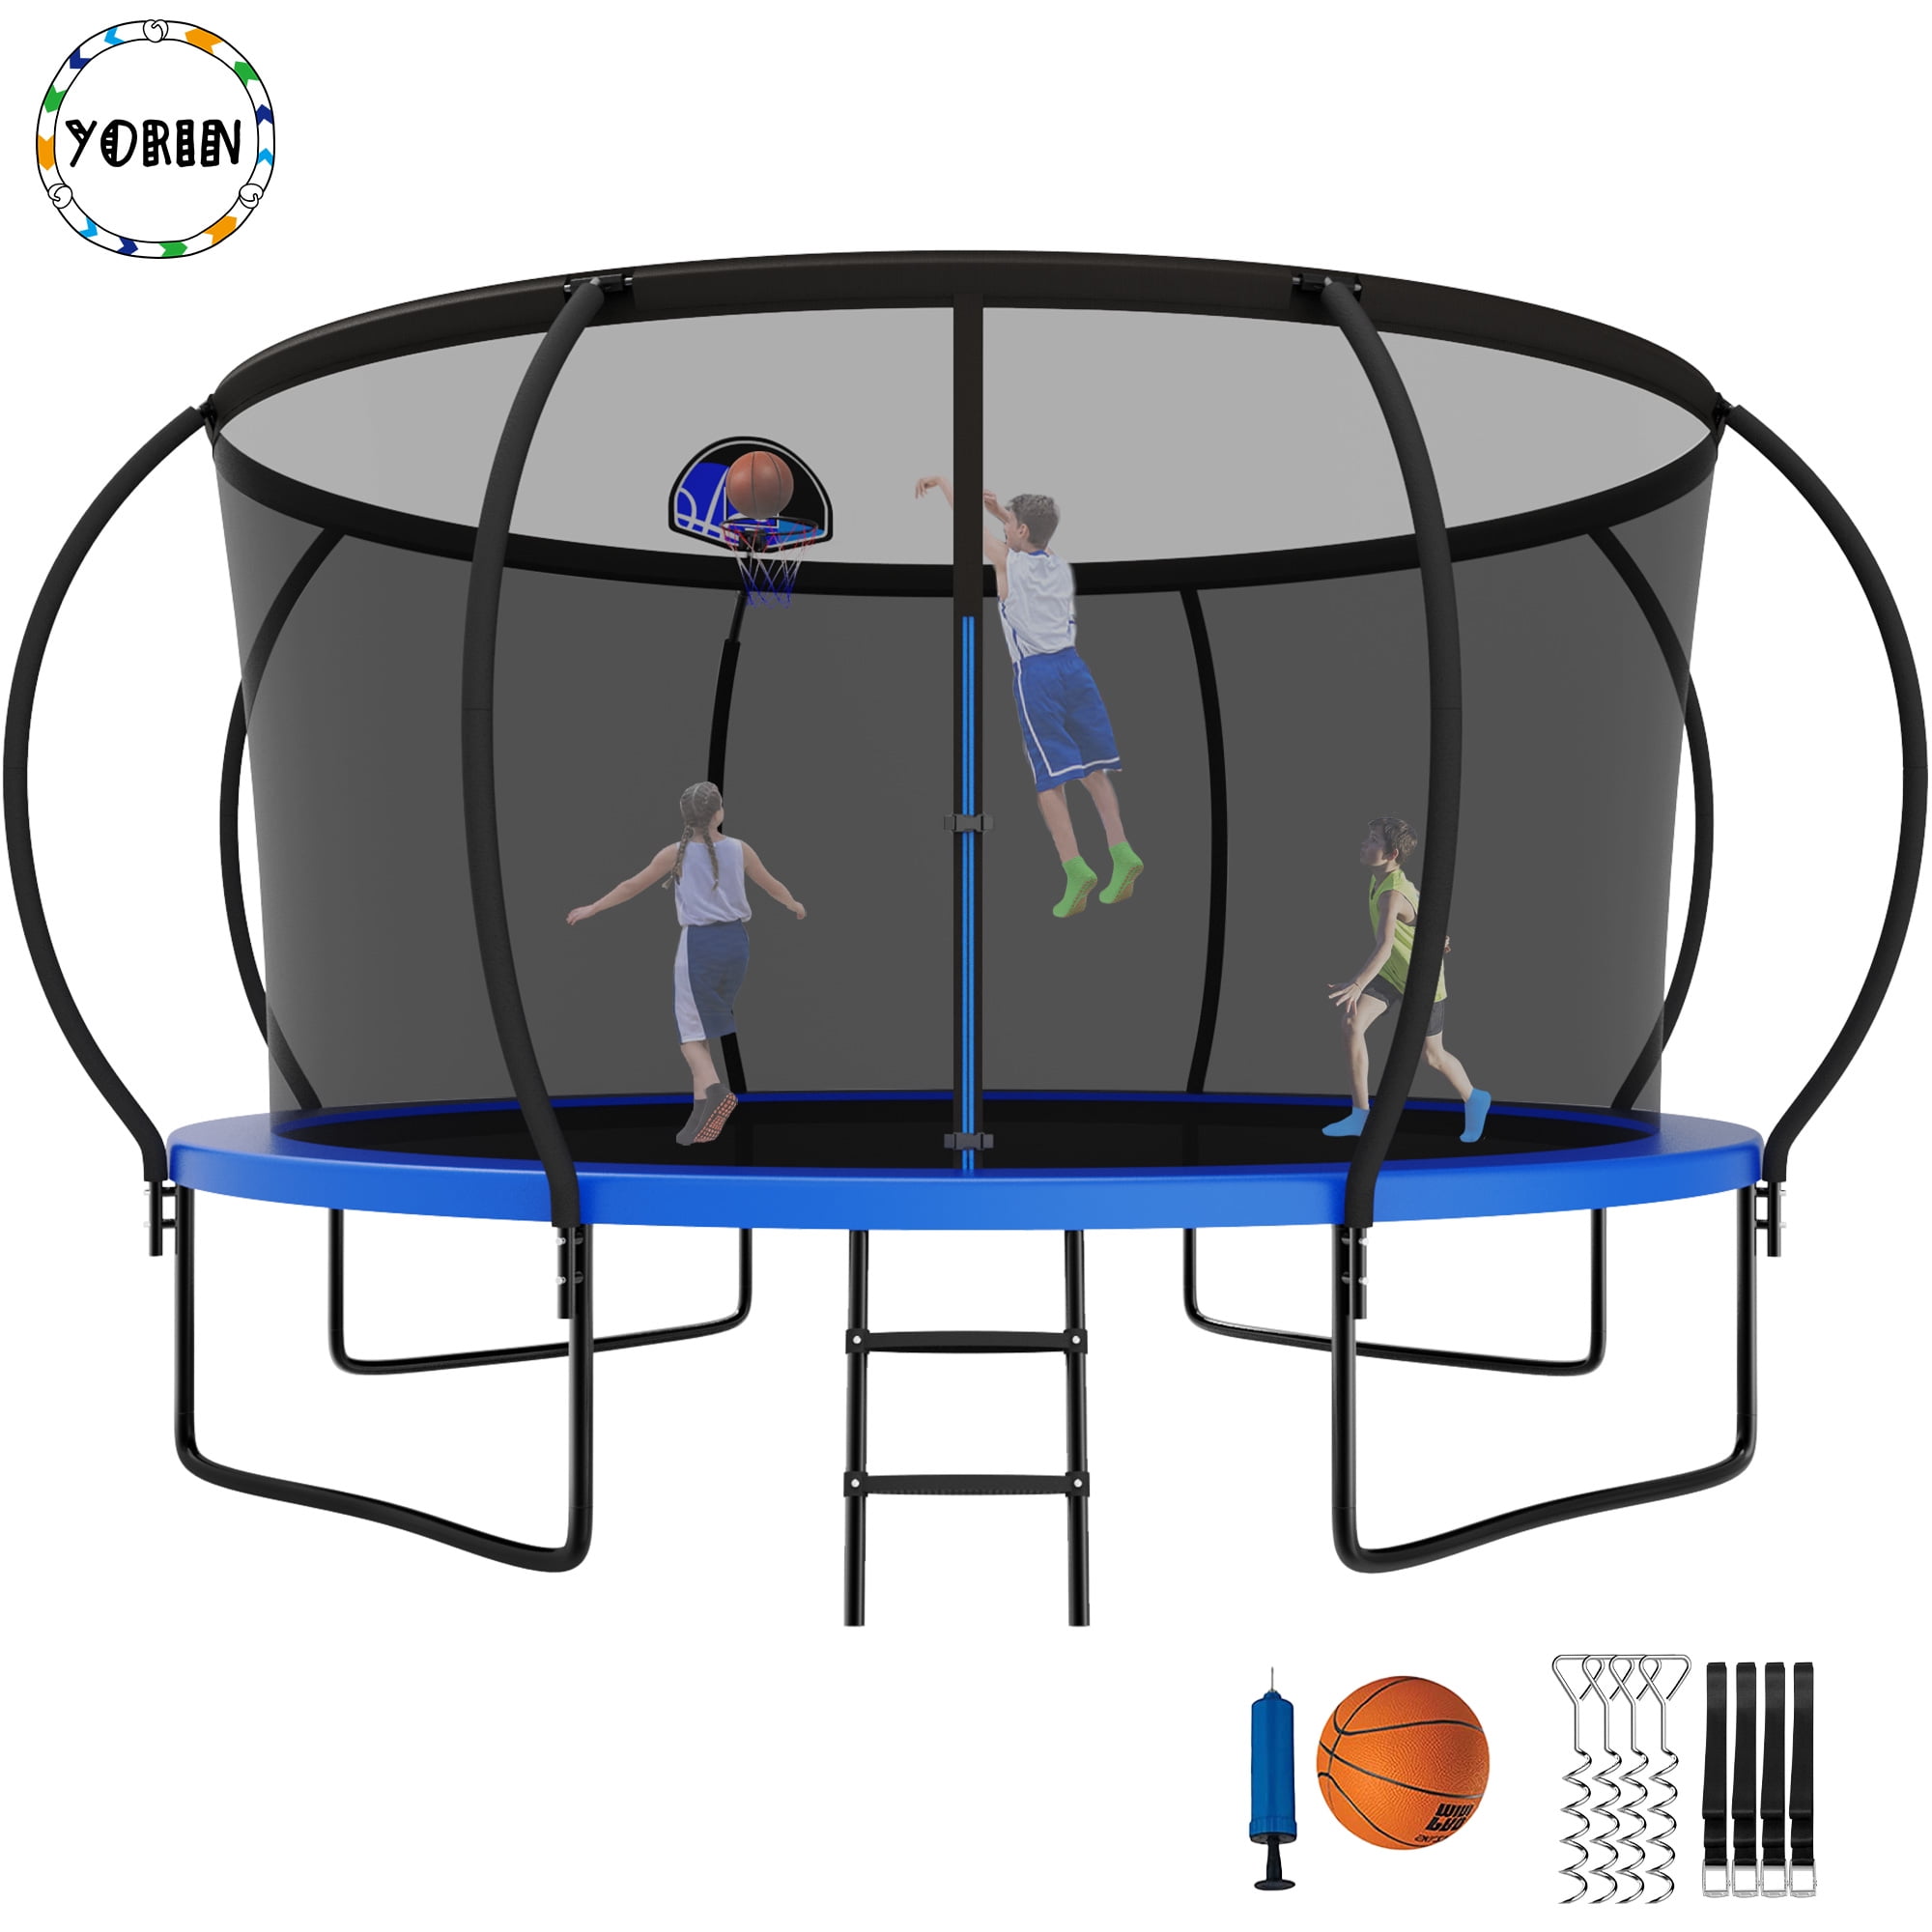 YORIN Trampoline for 5-6 Kids, 12 FT Trampoline for Adults with ...